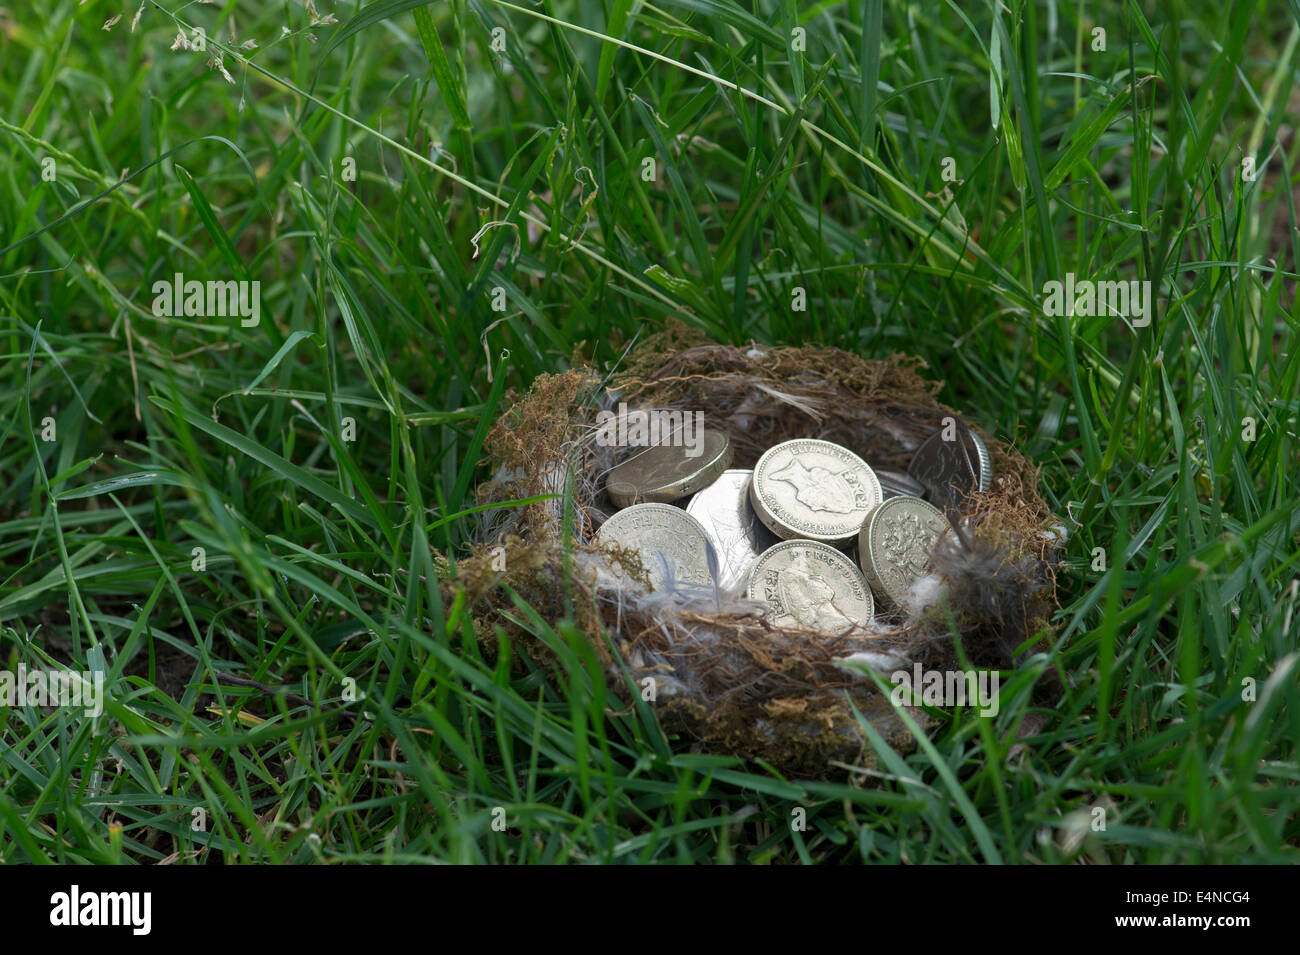 English Coins in a birds nest on grass Stock Photo